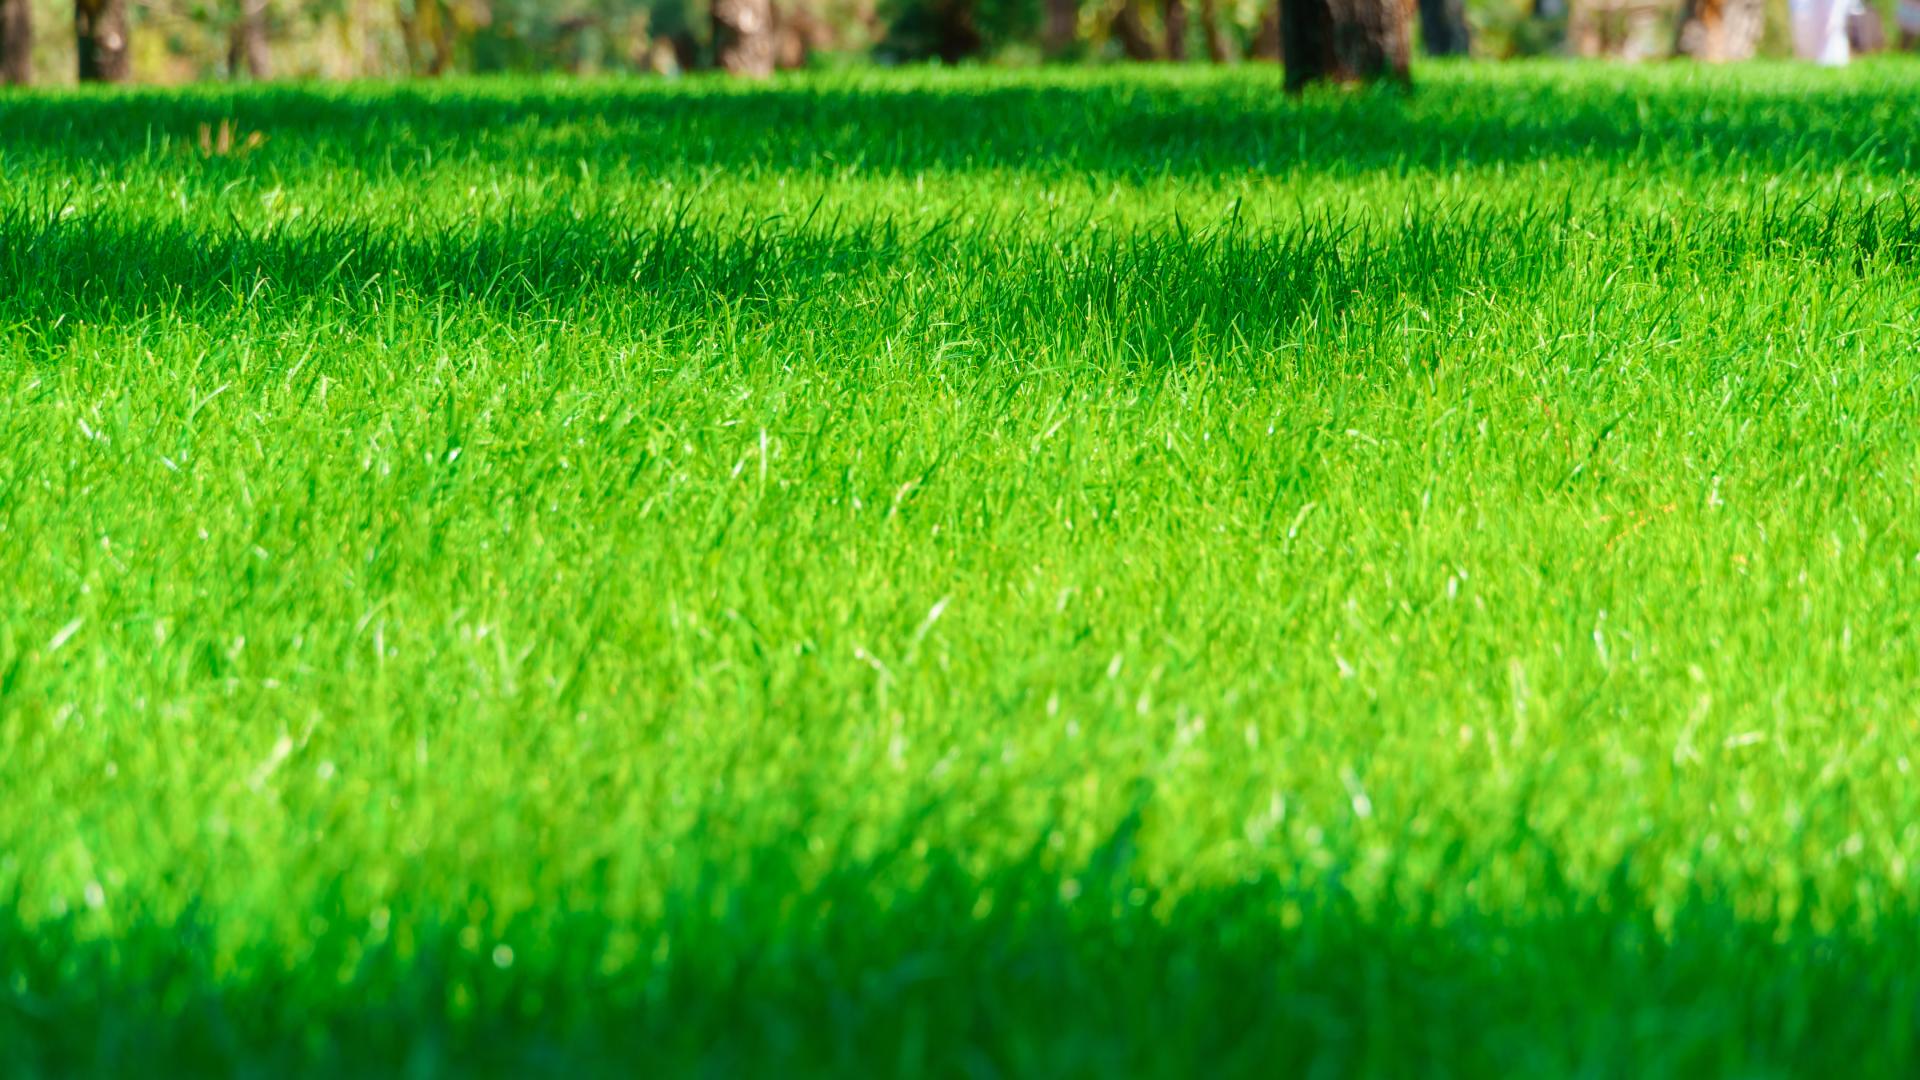 Luscious growing lawn after fertilization services performed in Waseca, MN.